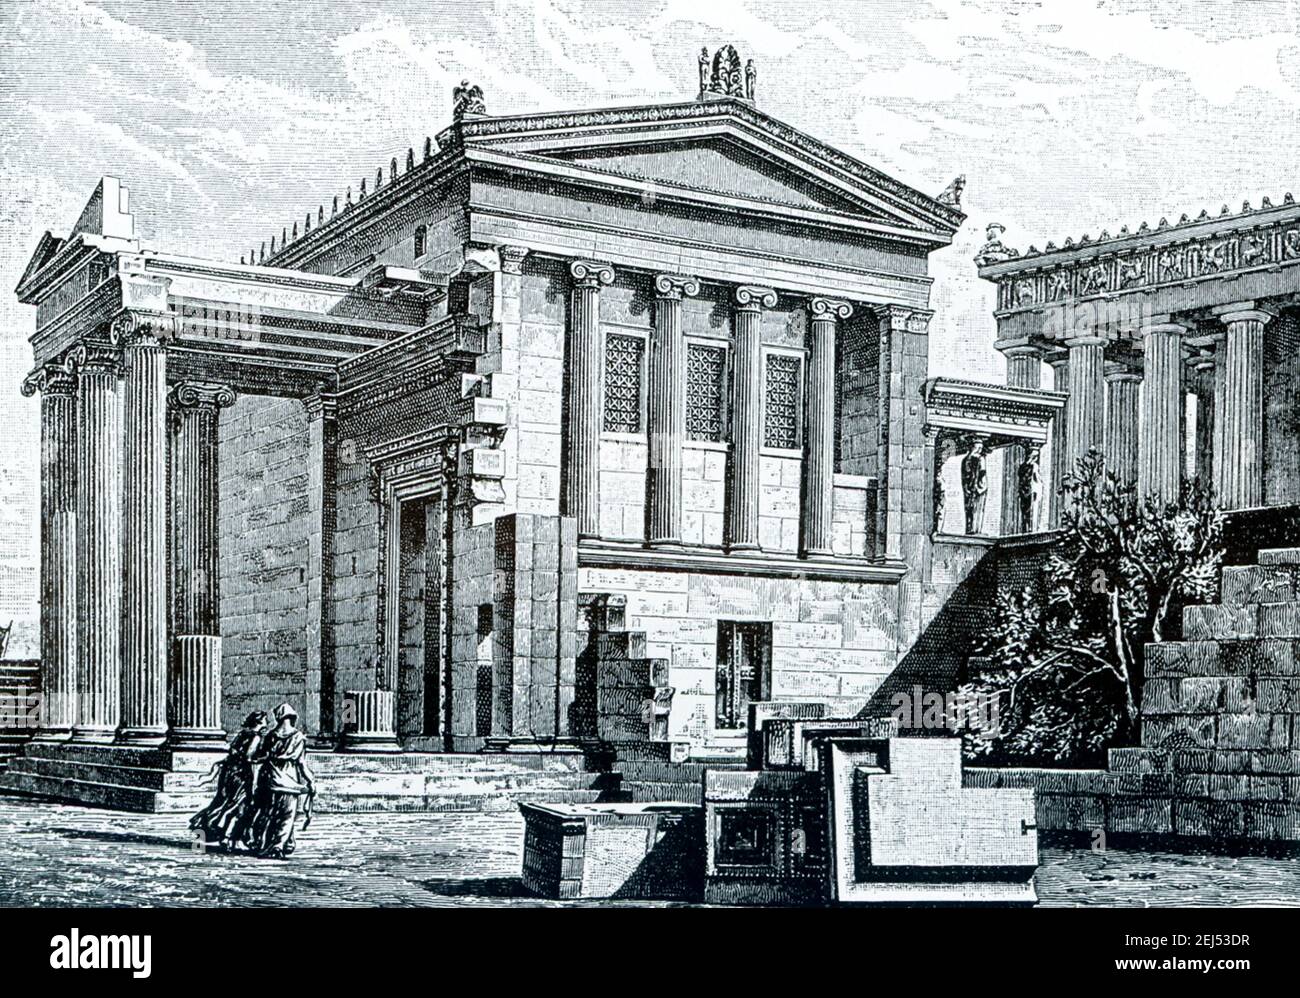 This image shows the Ereichtheion (Erechtheion and Erechtheum) on the Acropolis at Athens. The drawing is based on that by the German-Austrian architect and archaeologist George Niemann. The areas labled are; North Lobby,  Caryatid Porch, and the Parthenon. Stock Photo